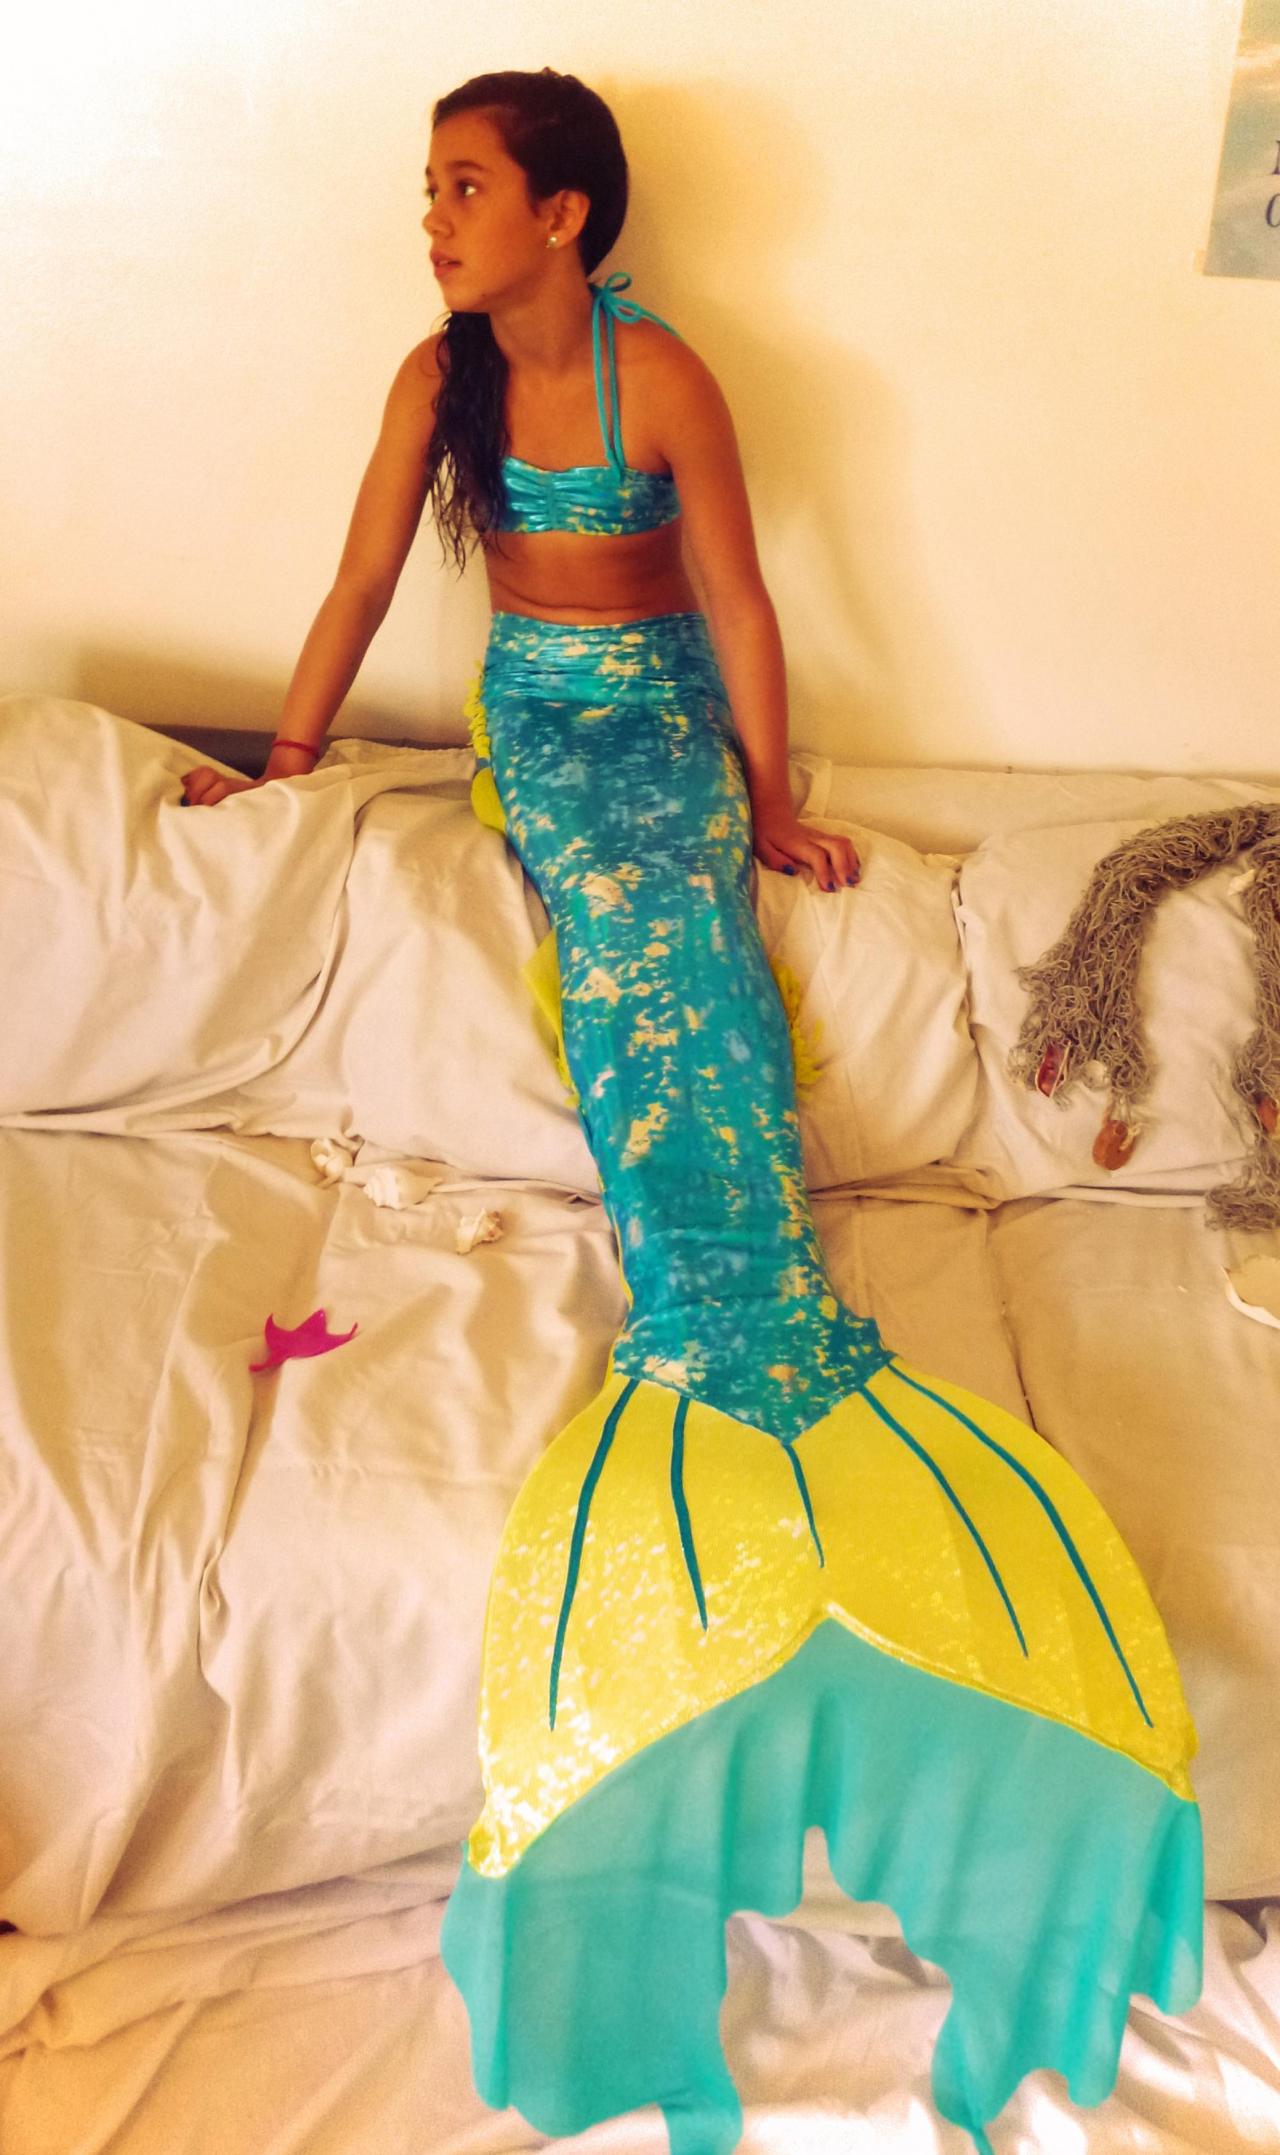 Aqua Mermaid Tail. A Piece Of Art Handmade By Mermaidreams. Tailored Just For You With Monofin Included